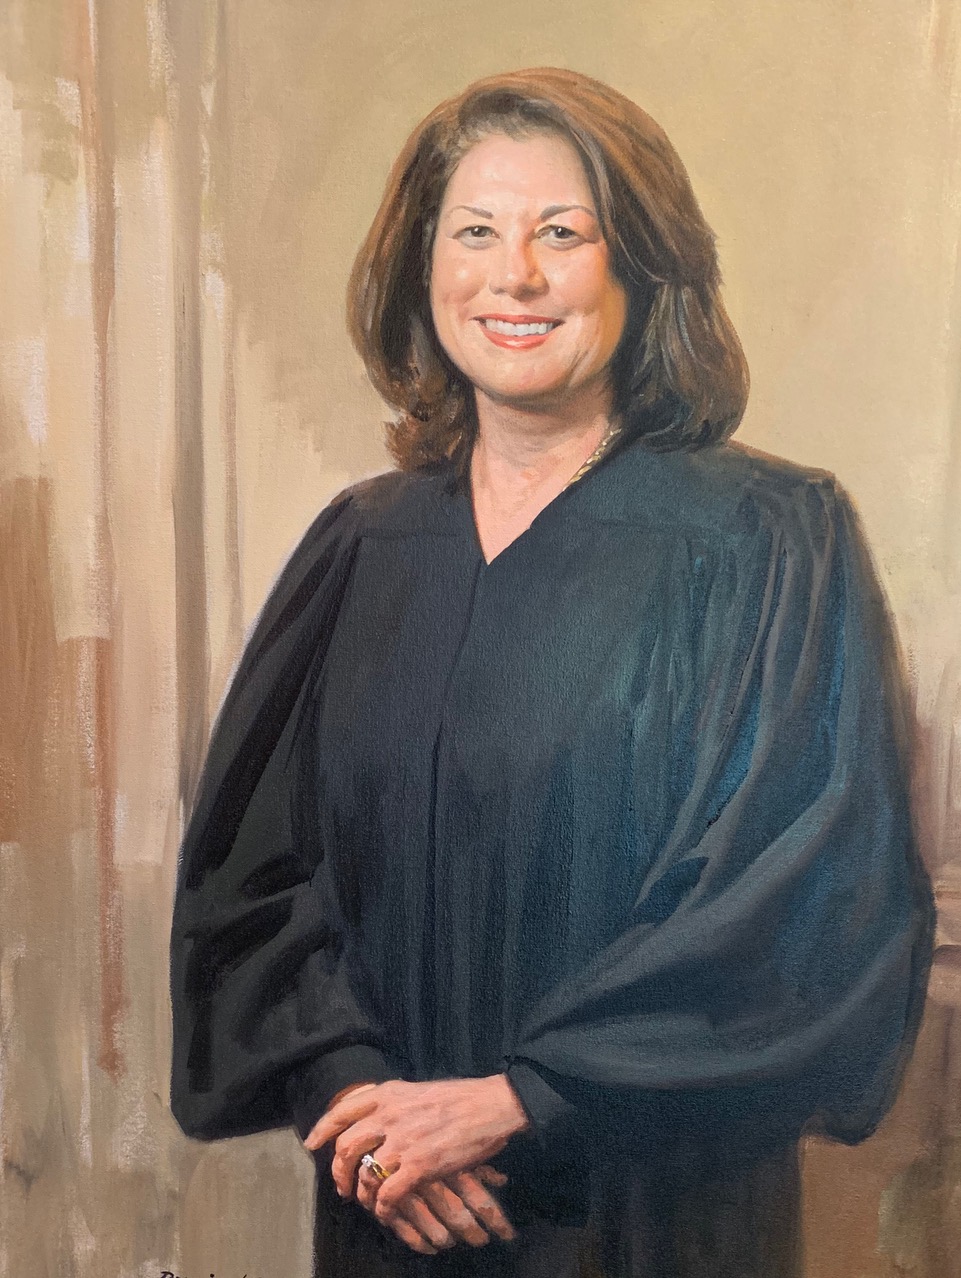 Ross Rossin Portrait Artist in Atlanta's Oil Painting of Judge Mary Staley Clark - Portraiture in USA